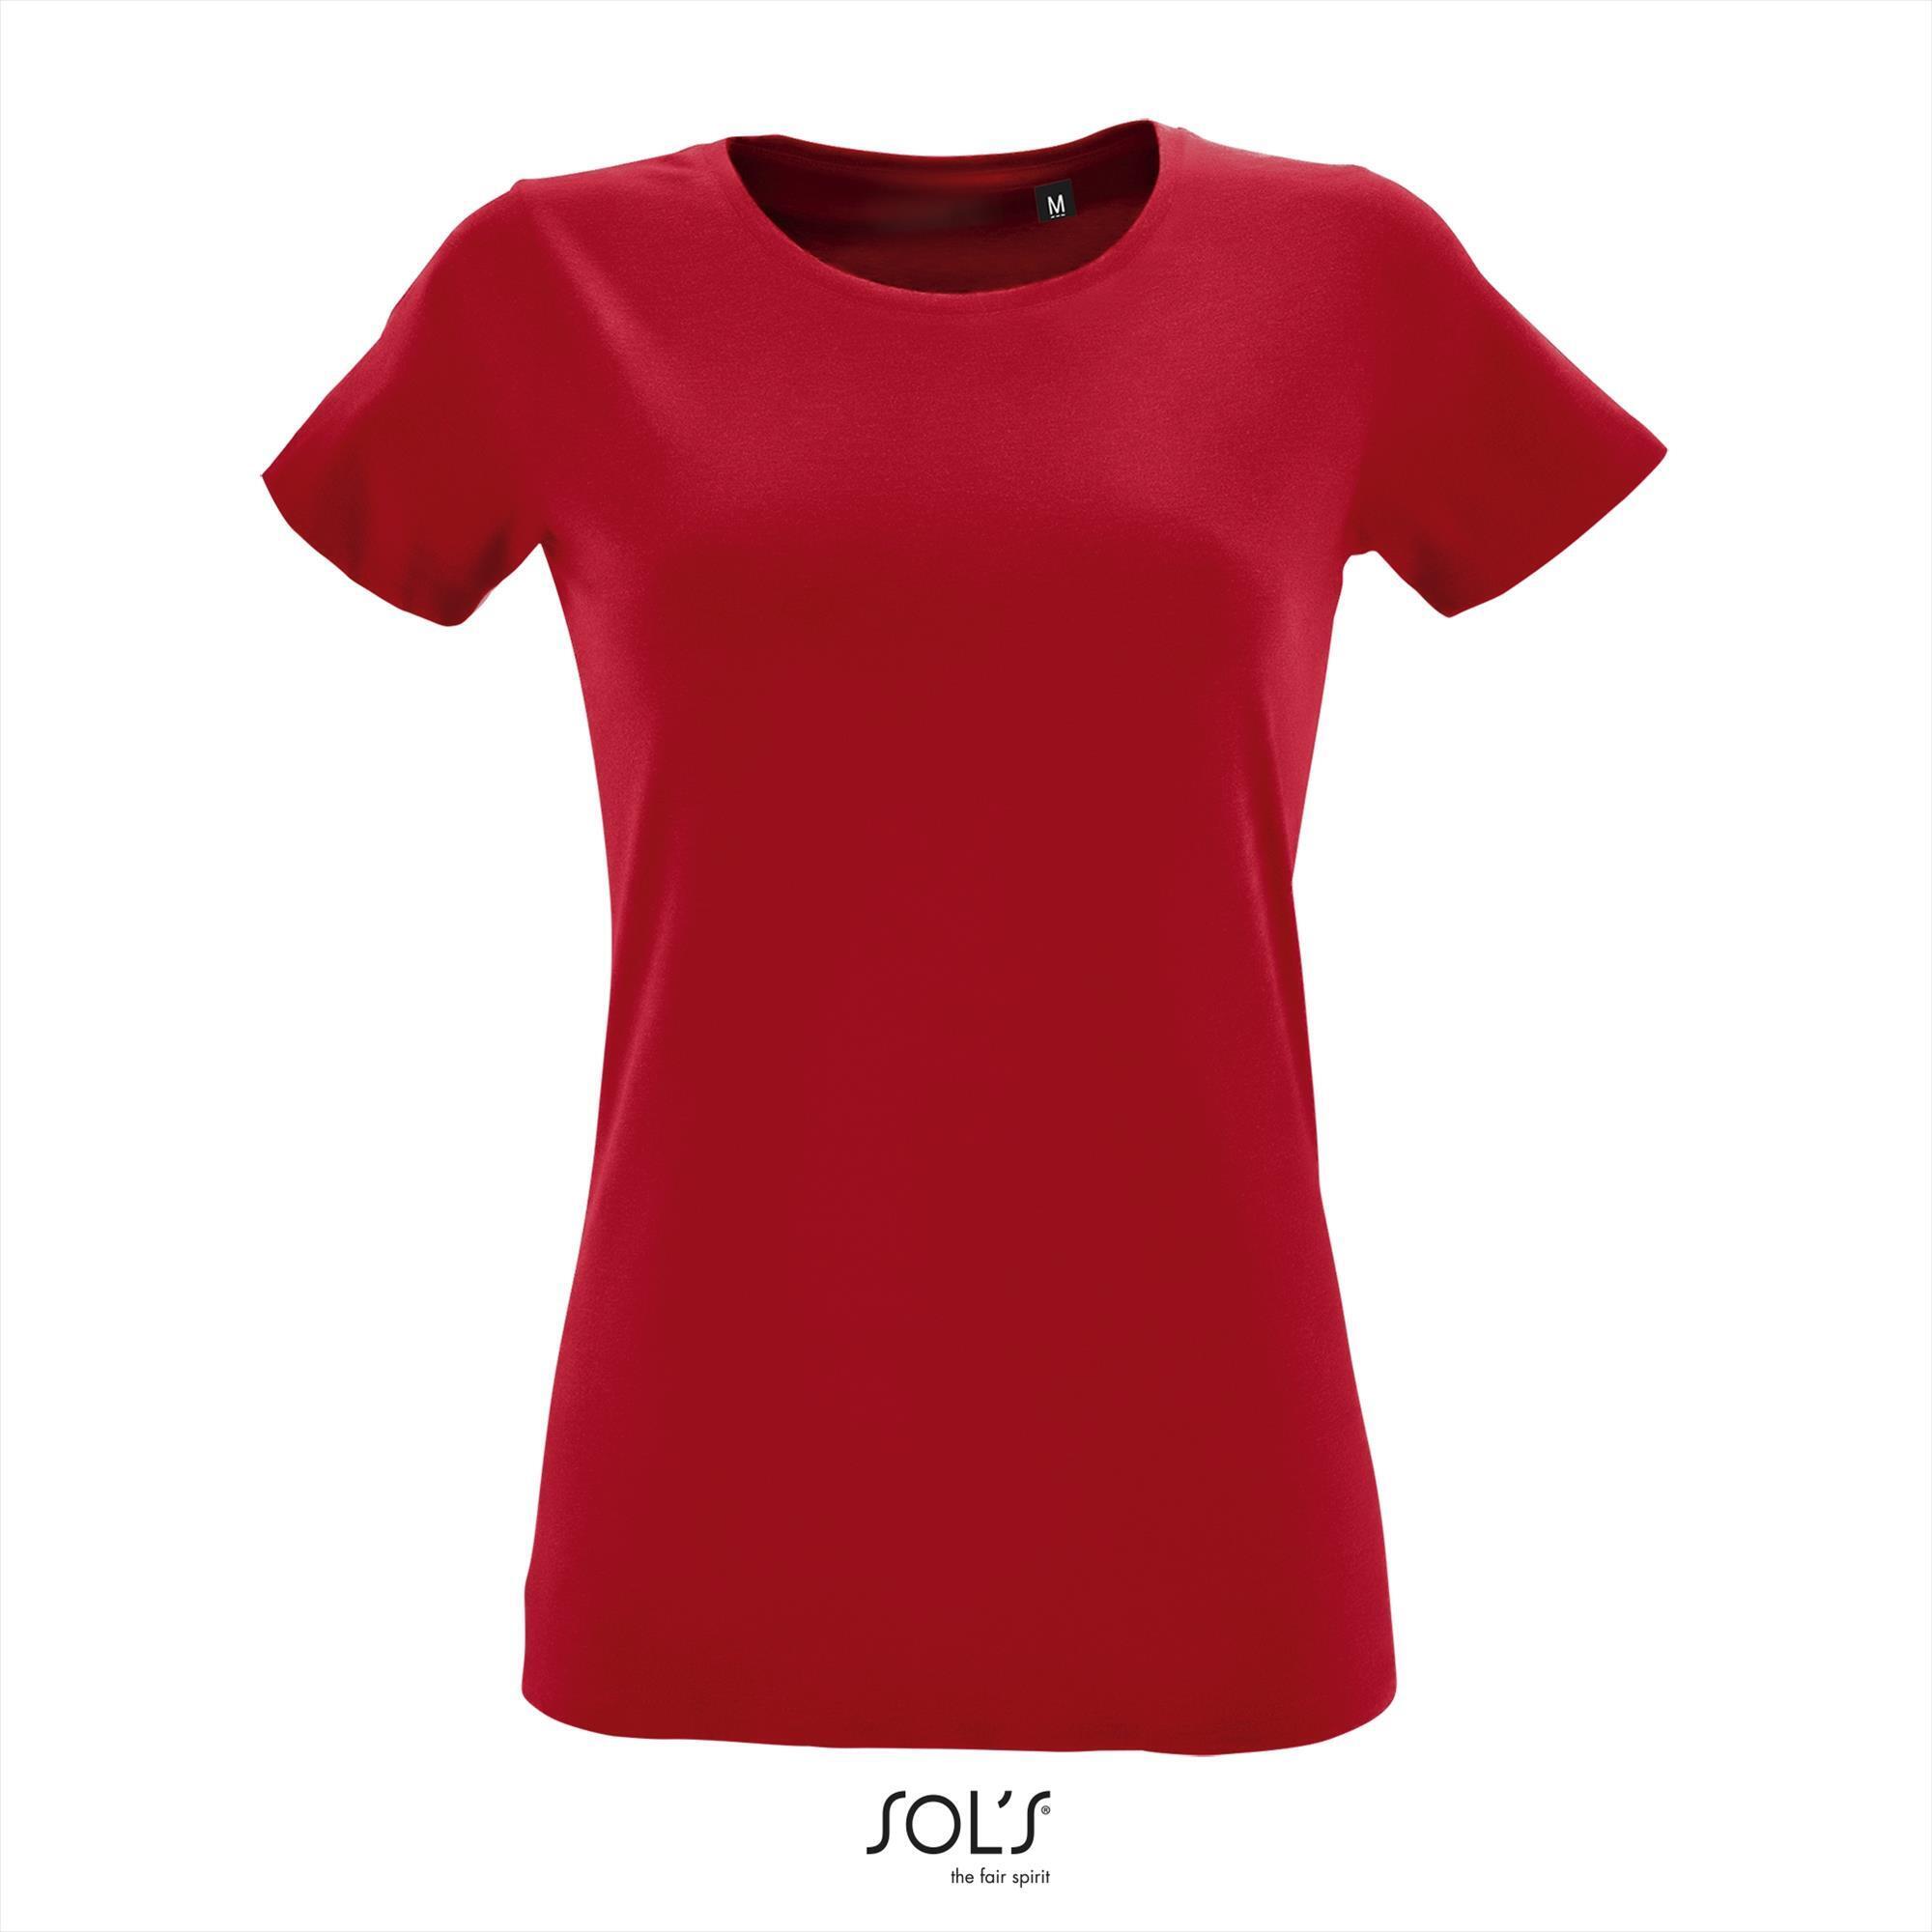 T-shirt Dames rood fitted met ronde hals